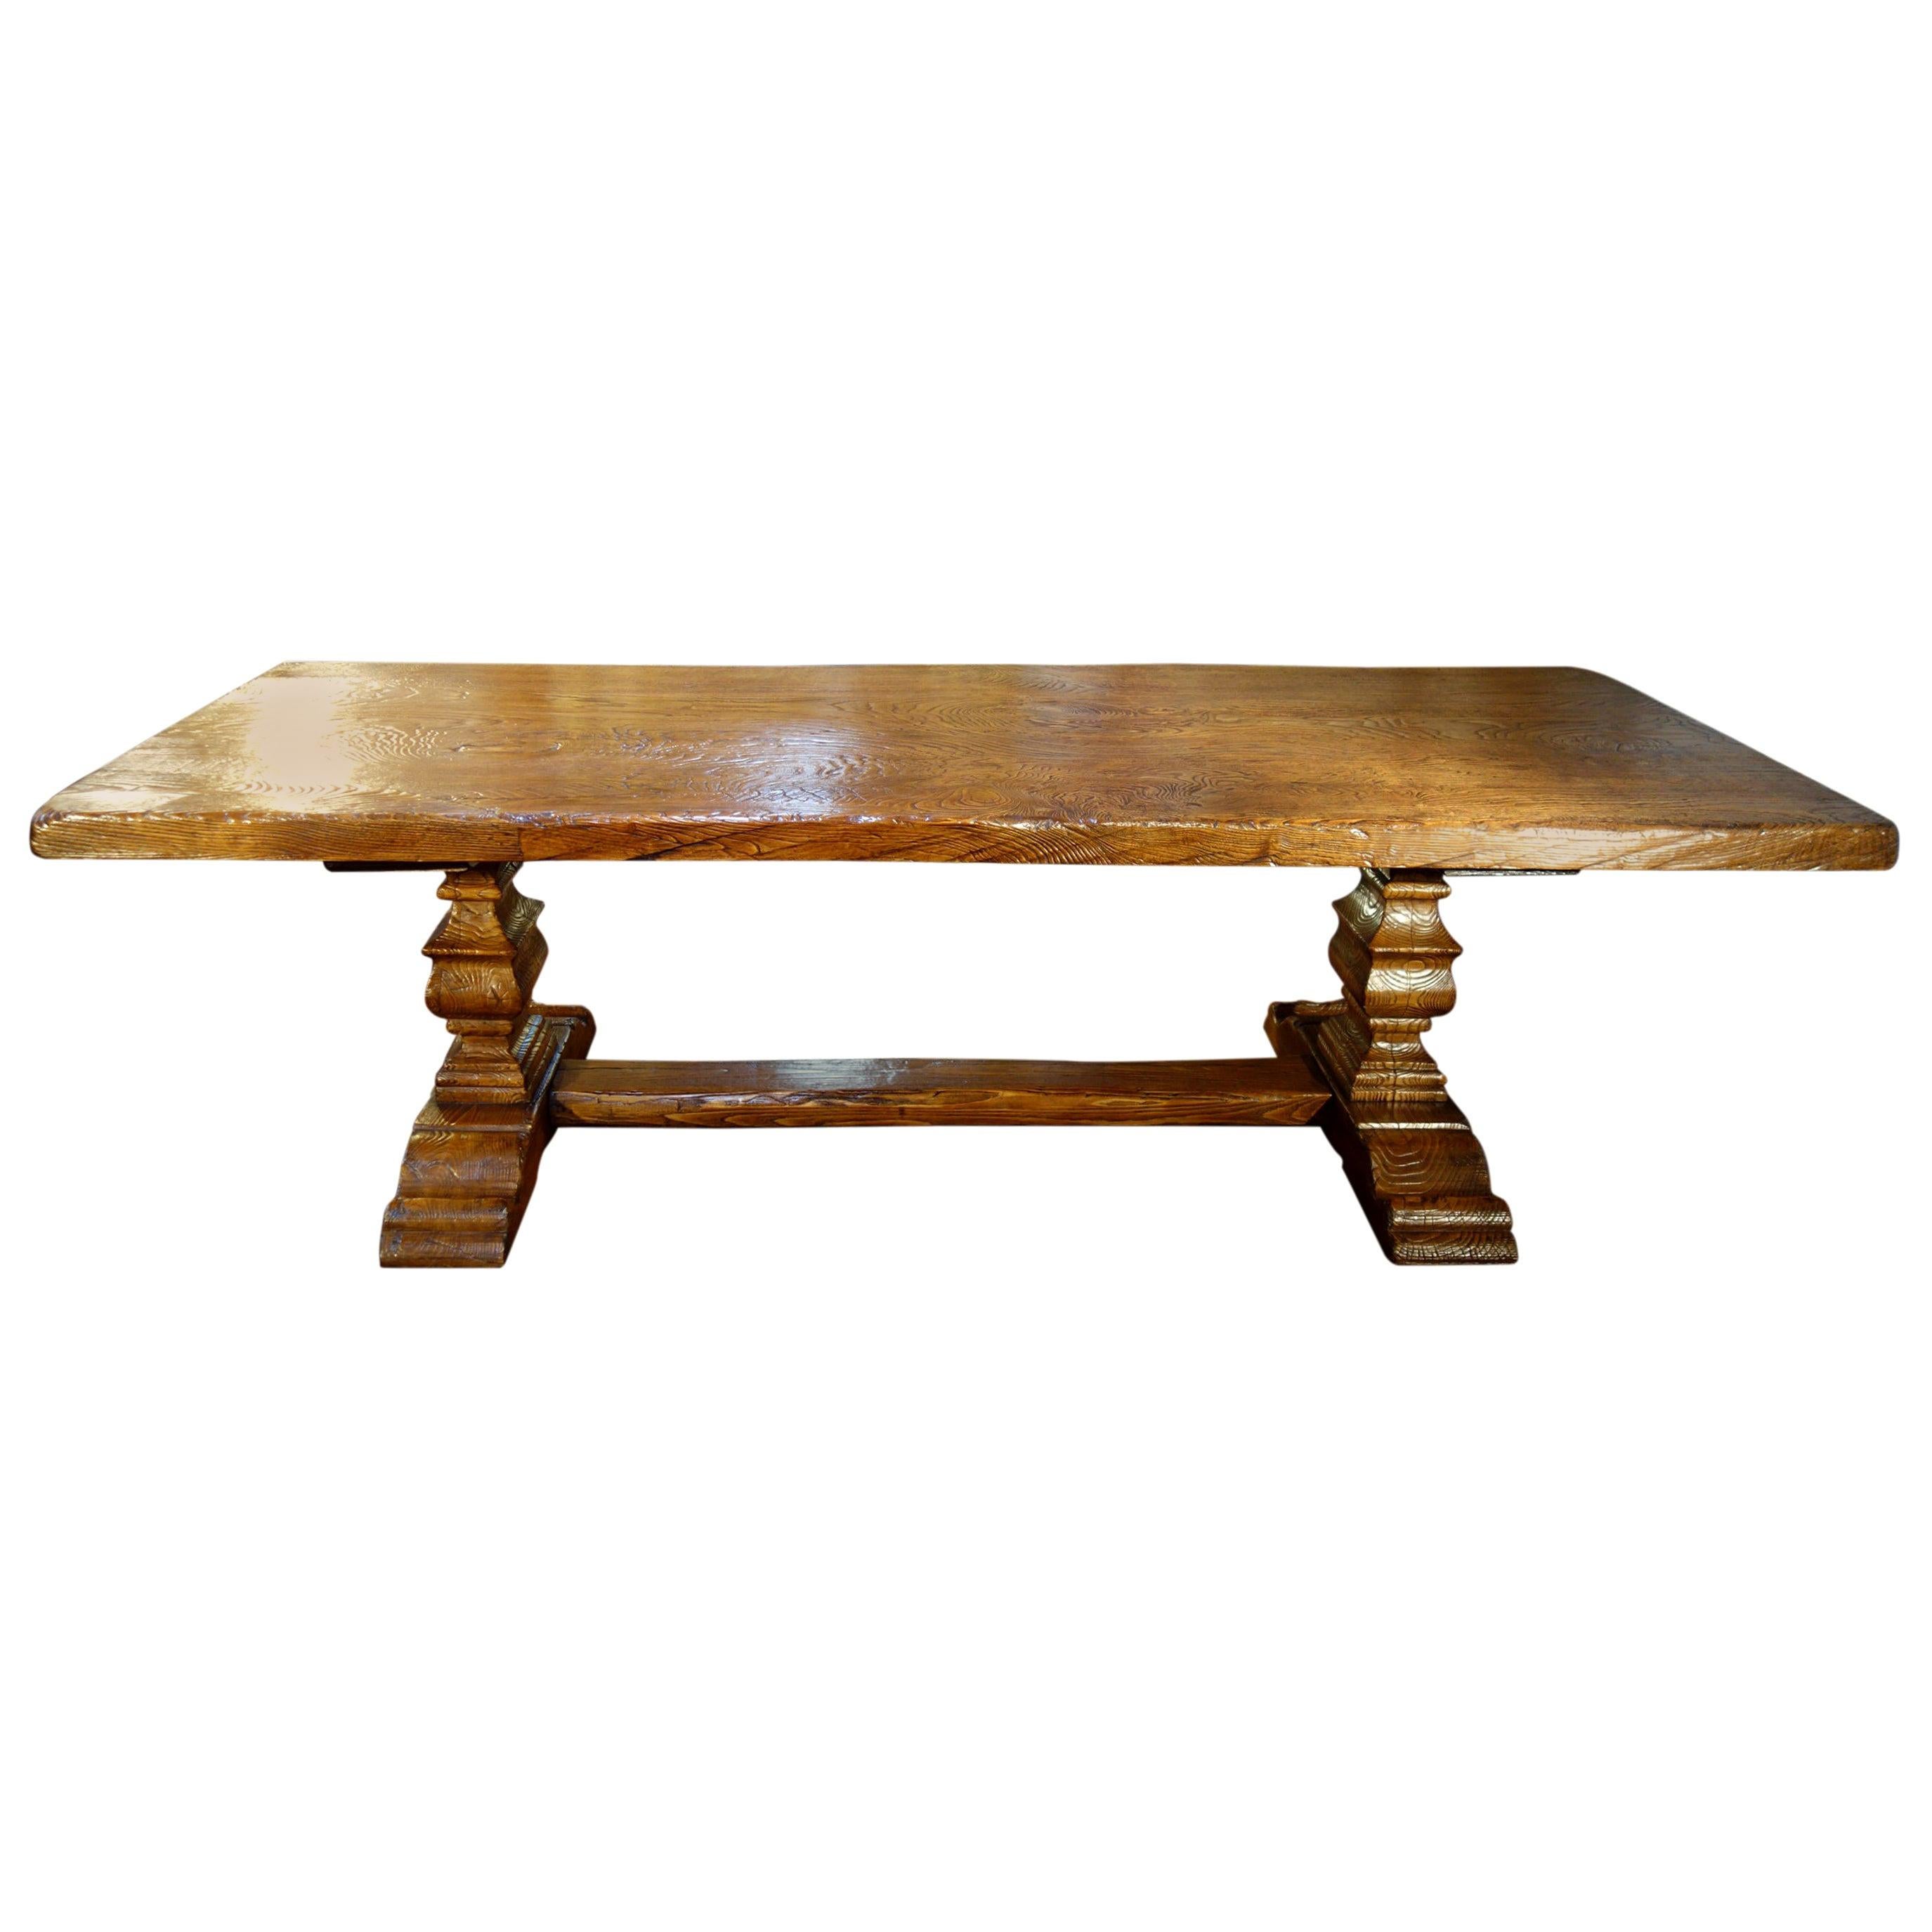 17th C Style Italian Solid Slab Chestnut Trestle Table Made to Order For Sale